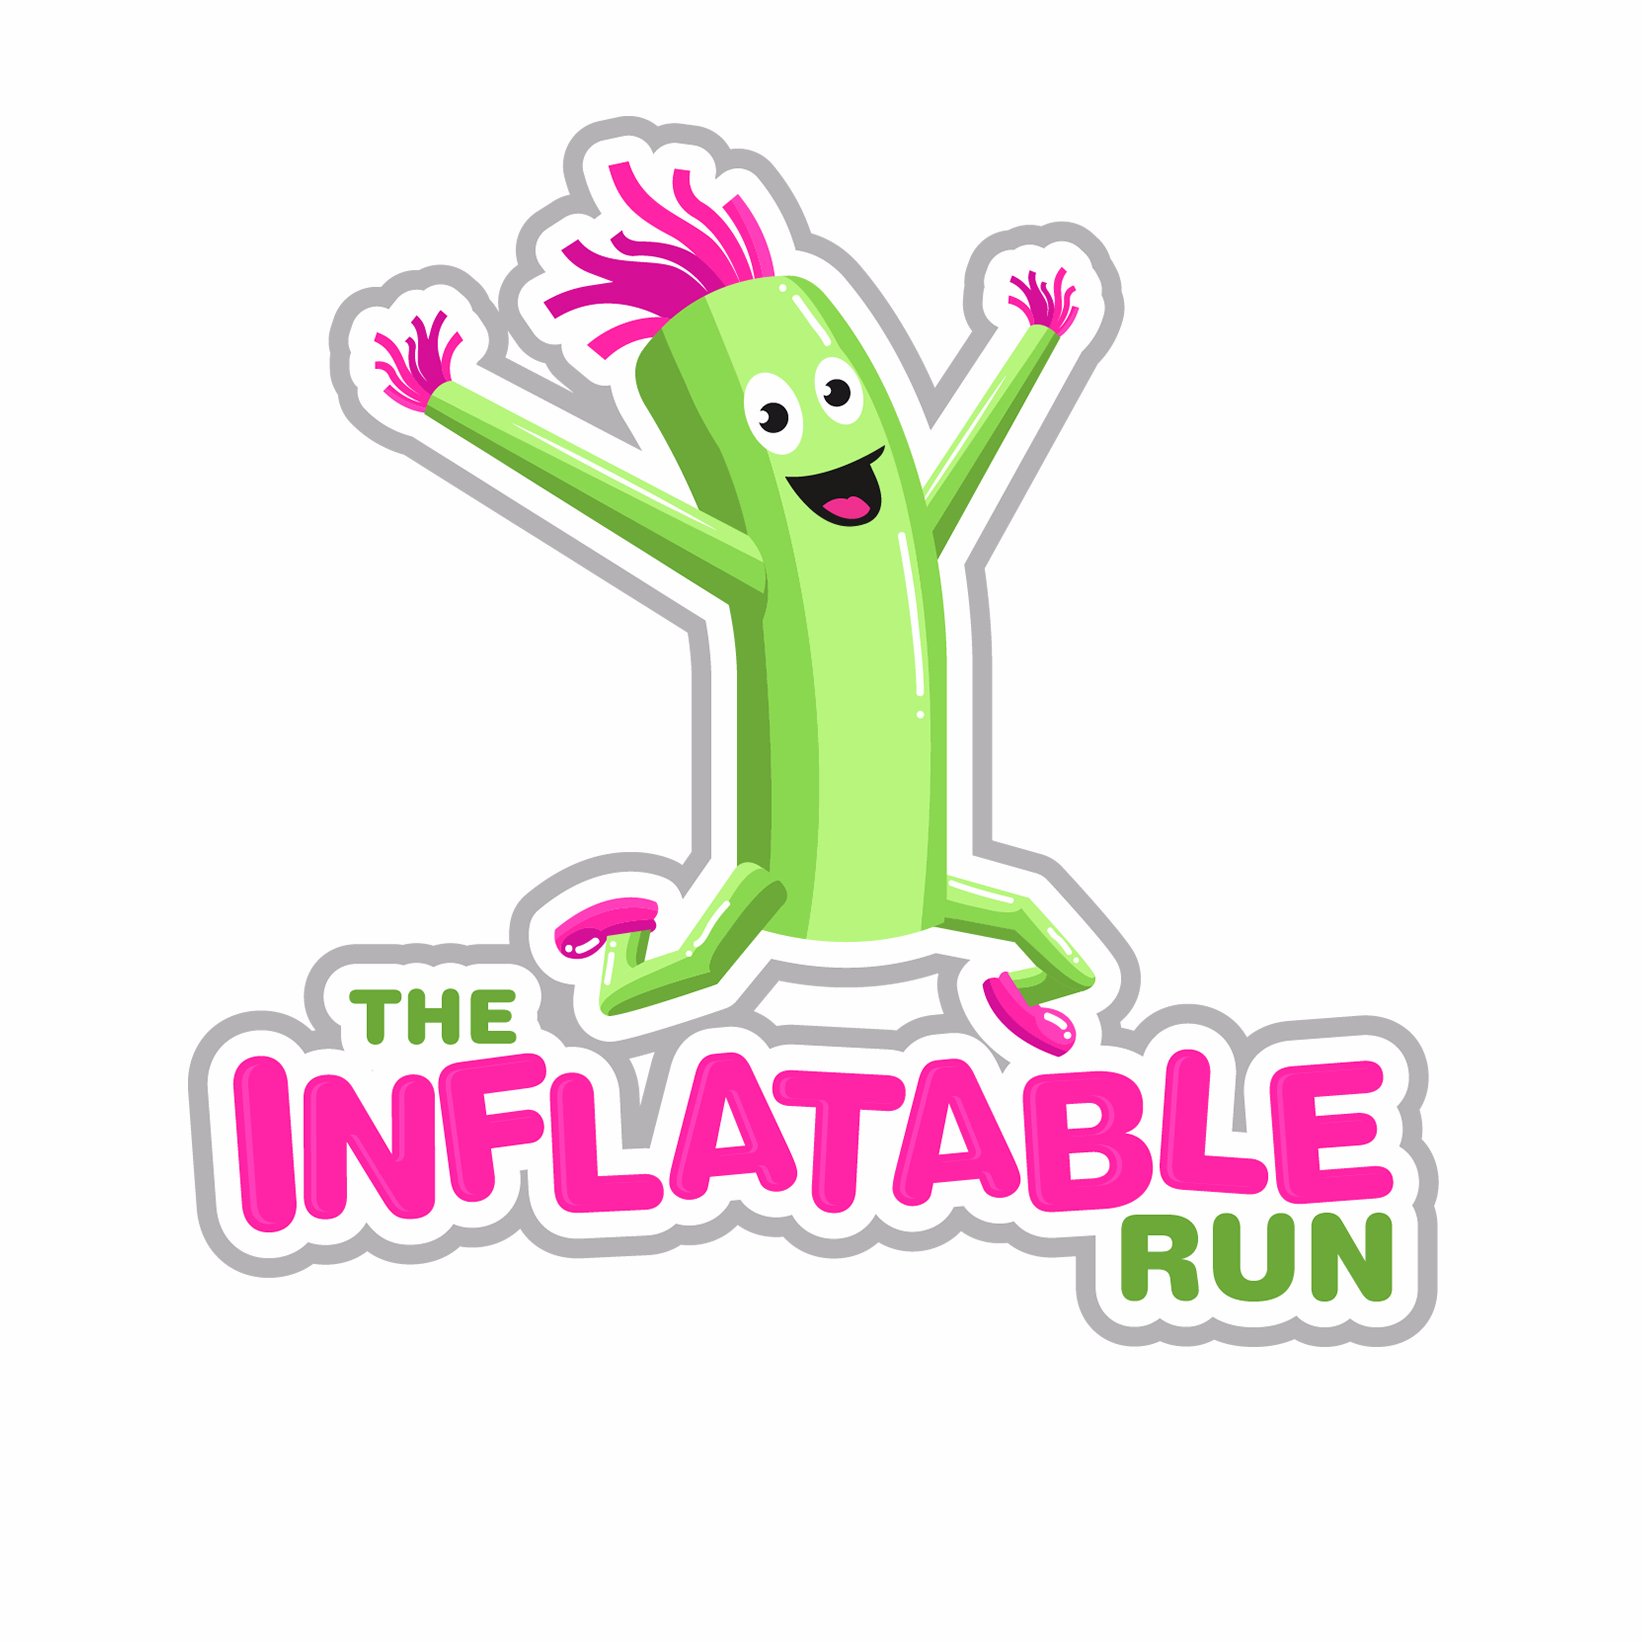 The Inflatable Run is an all ages fair featuring a family friendly 5k inflatable obstacle course plus fun games, shows, and attractions in the festival area.